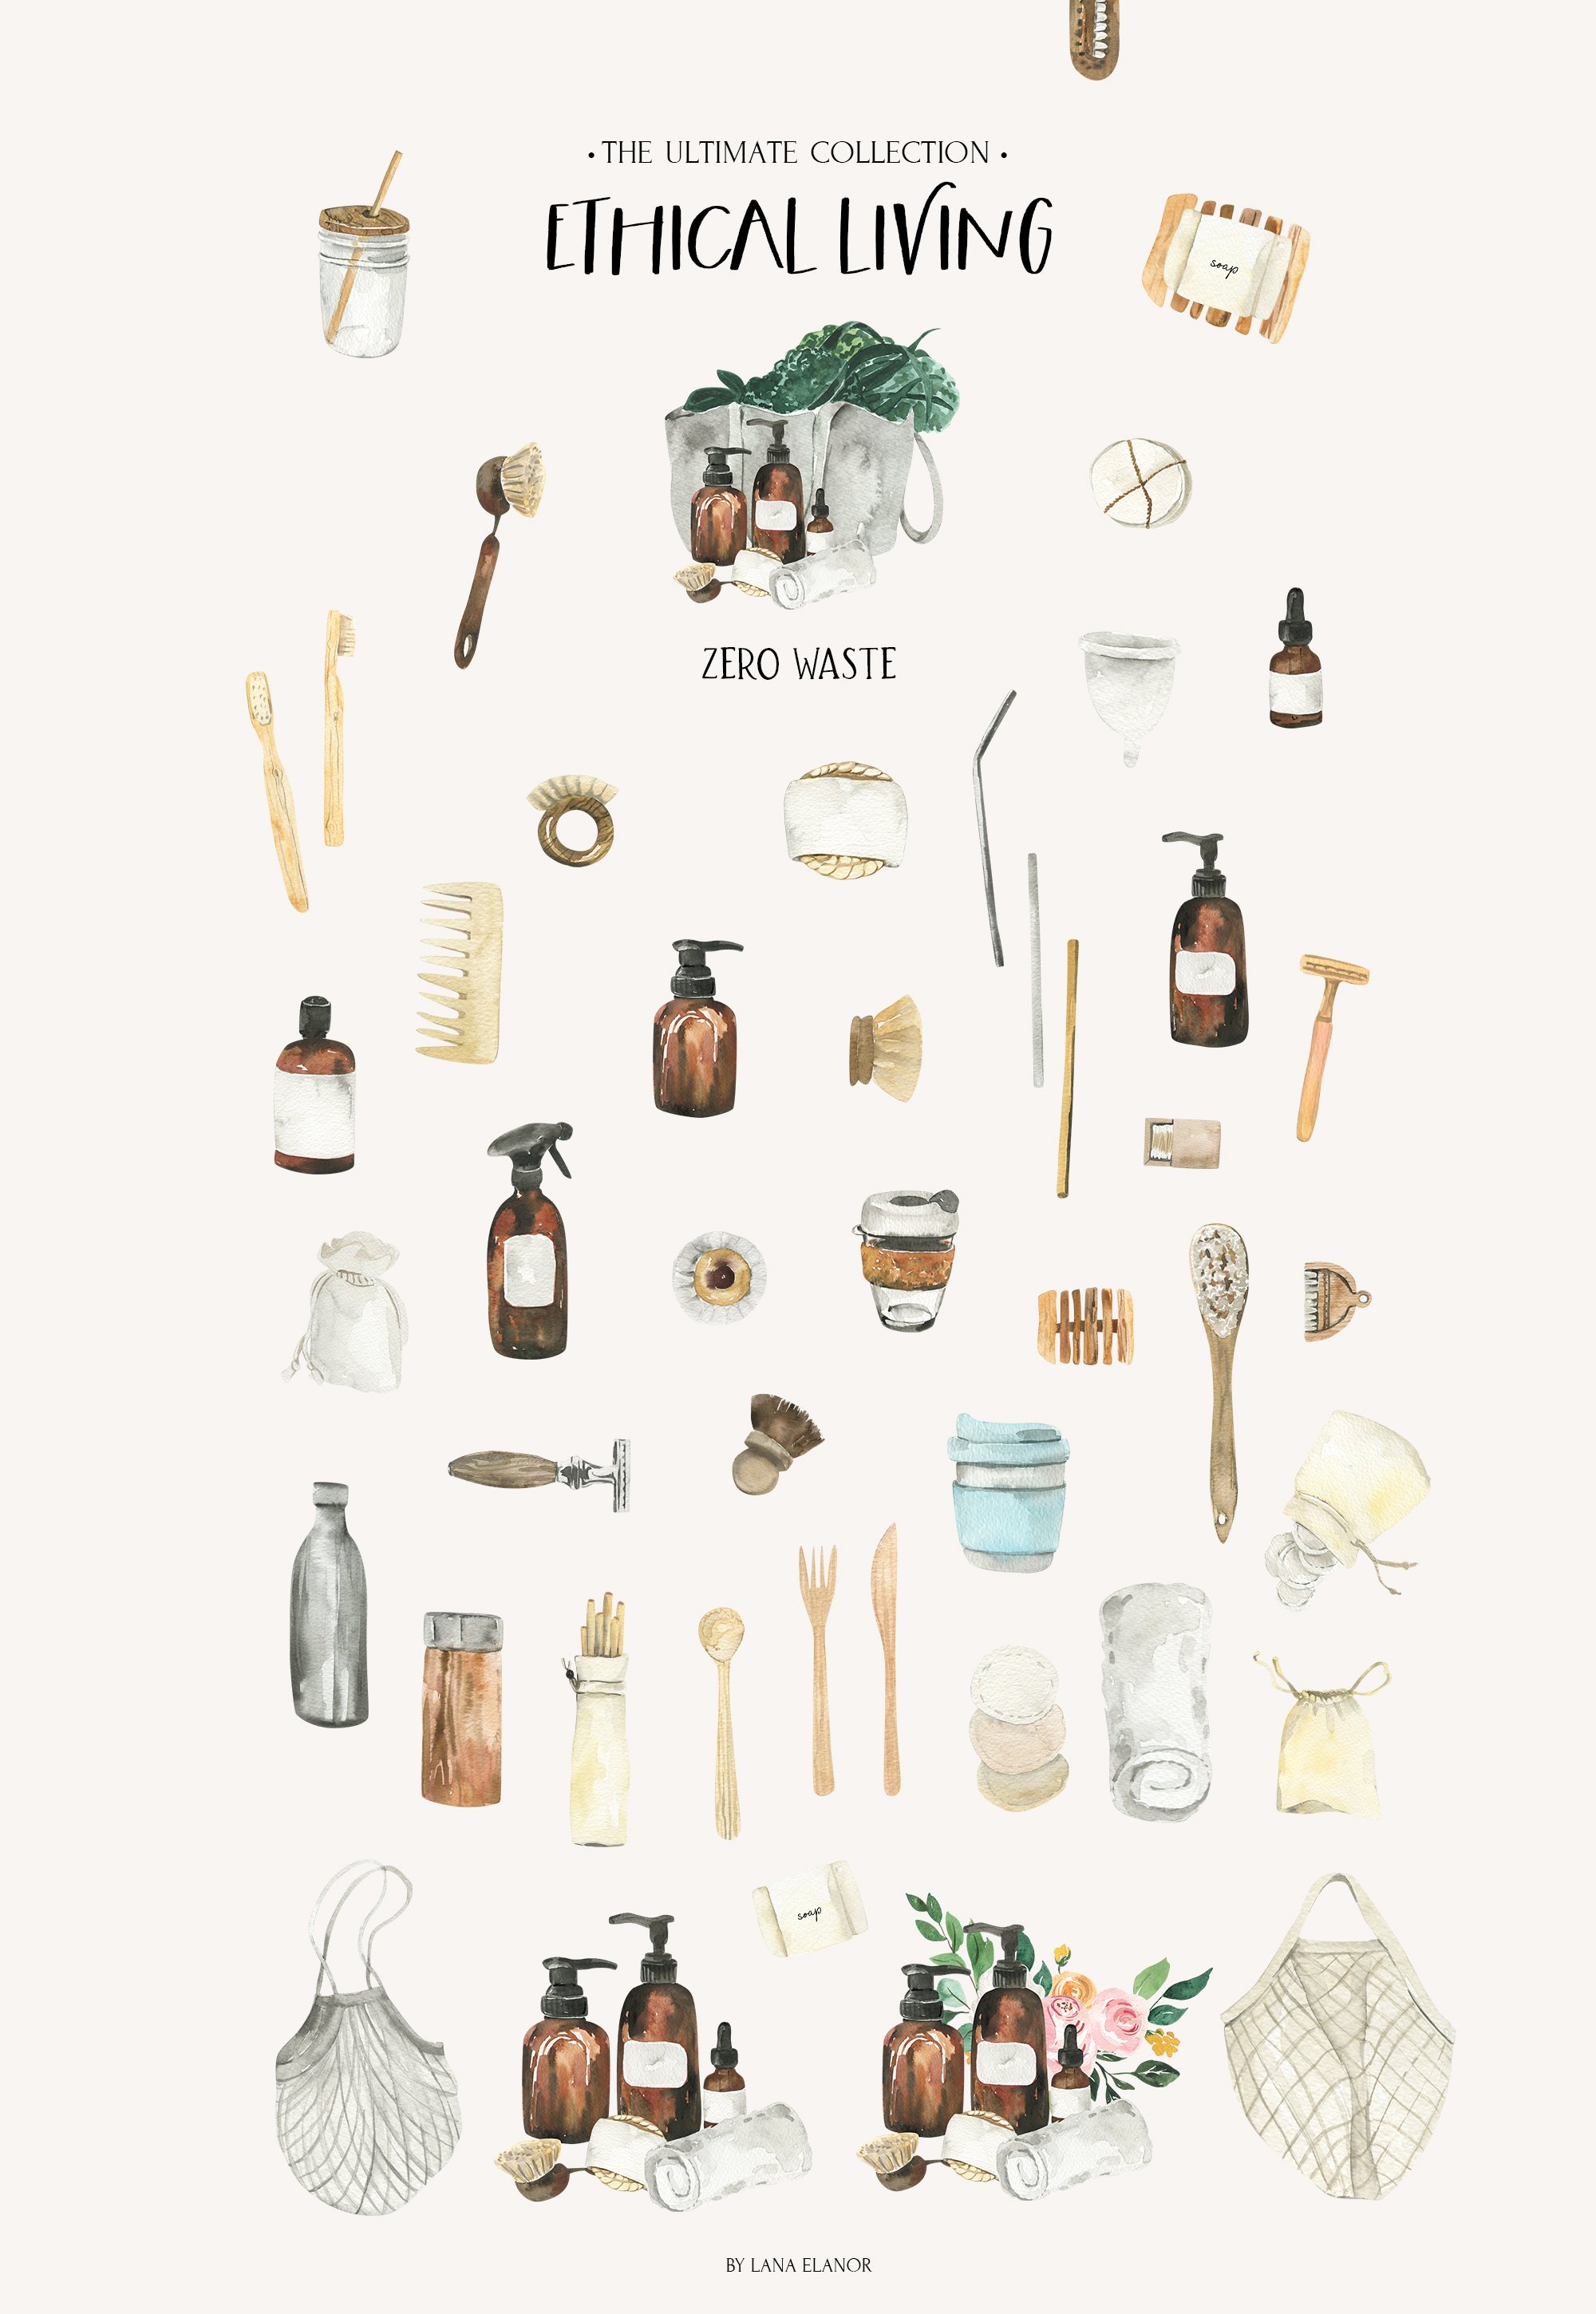 The images of zero waste beauty routine.